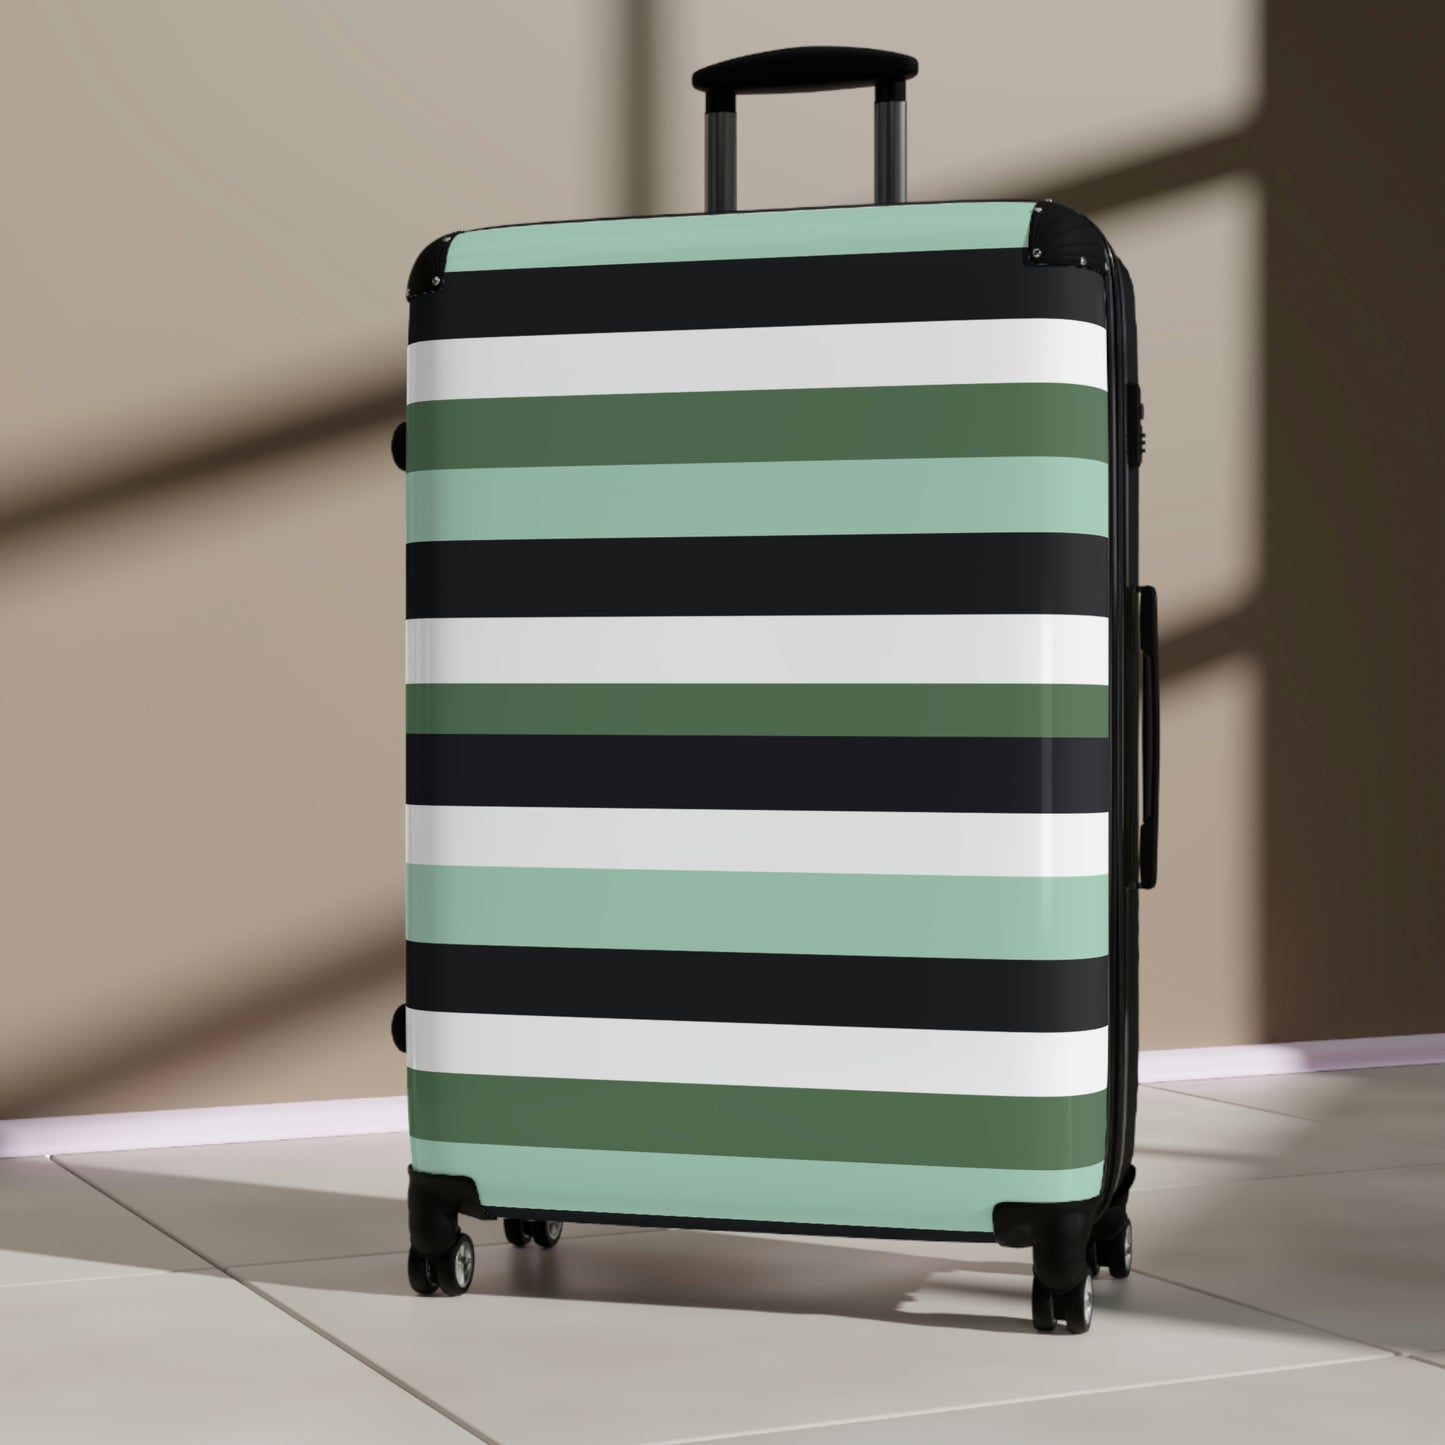 Custom Luggage / Green Suitcase, / Striped Luggage / Carry On Bag